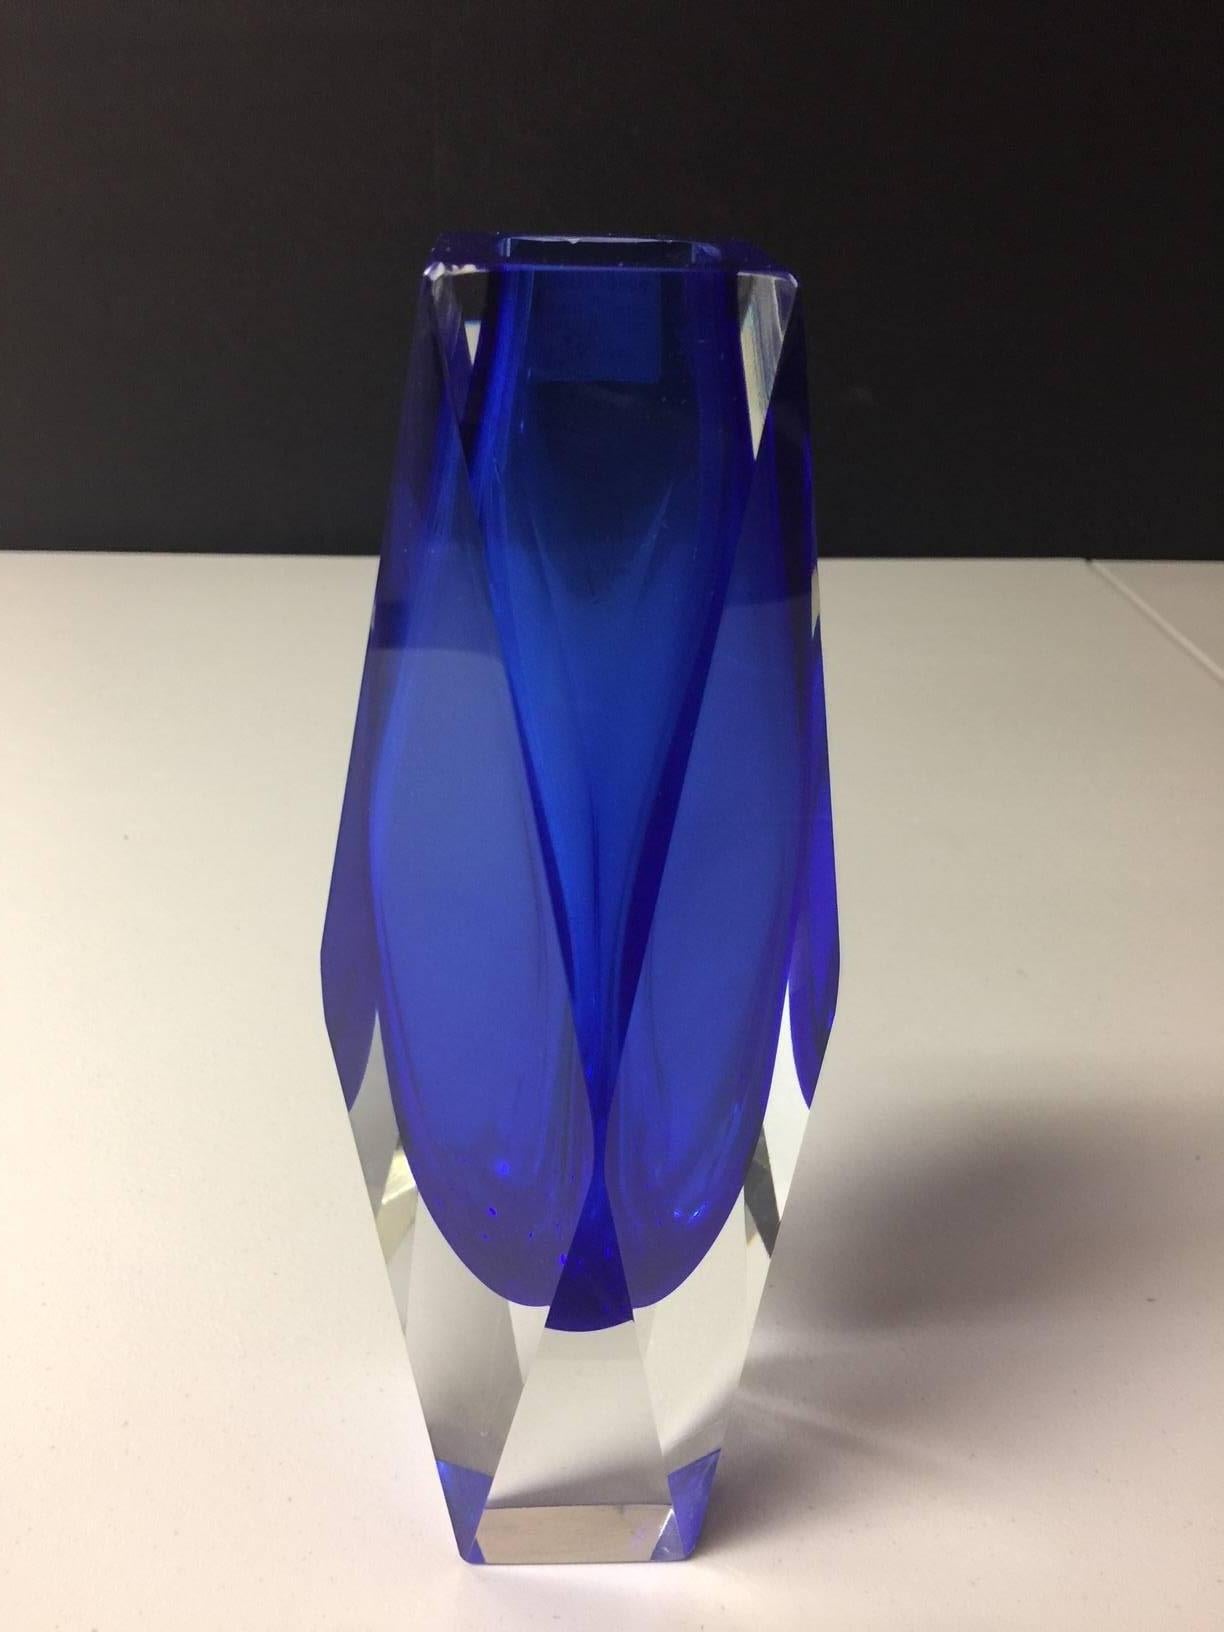 Cobalt blue Murano glass multifaceted vase with Sommerso technique by Alessandro Mandruzzato. Original, vintage, Mandruzzato tag attached.

Stunning color and clarity!